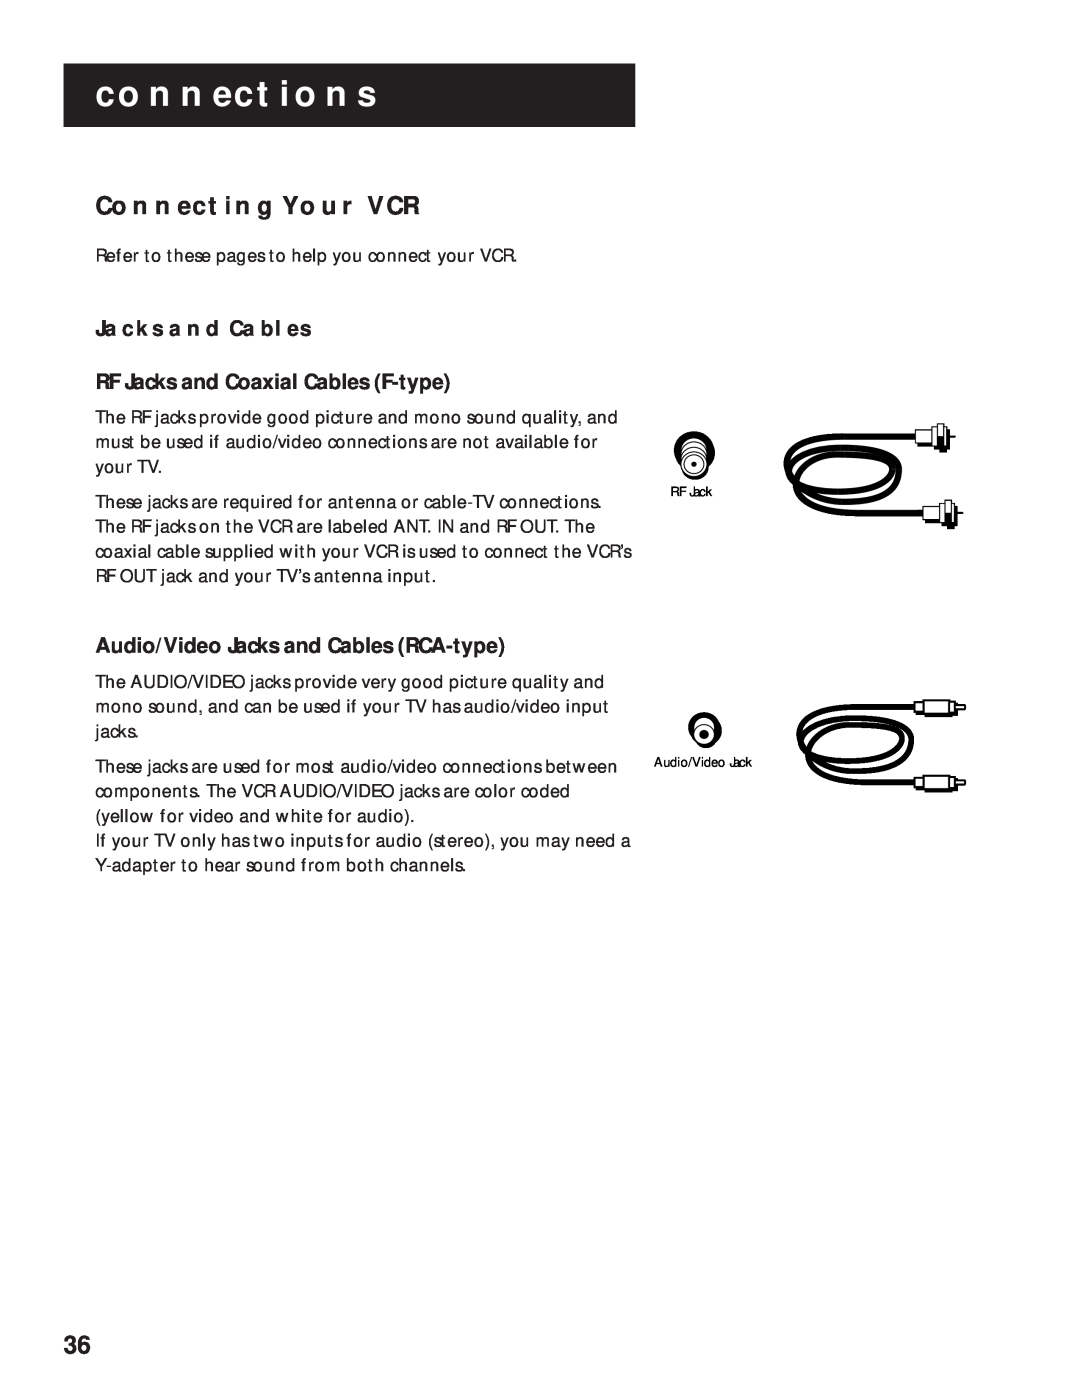 RCA VR525 manual Connecting Your Vcr, Connections, JACKS AND CABLES RF Jacks and Coaxial Cables F-type 